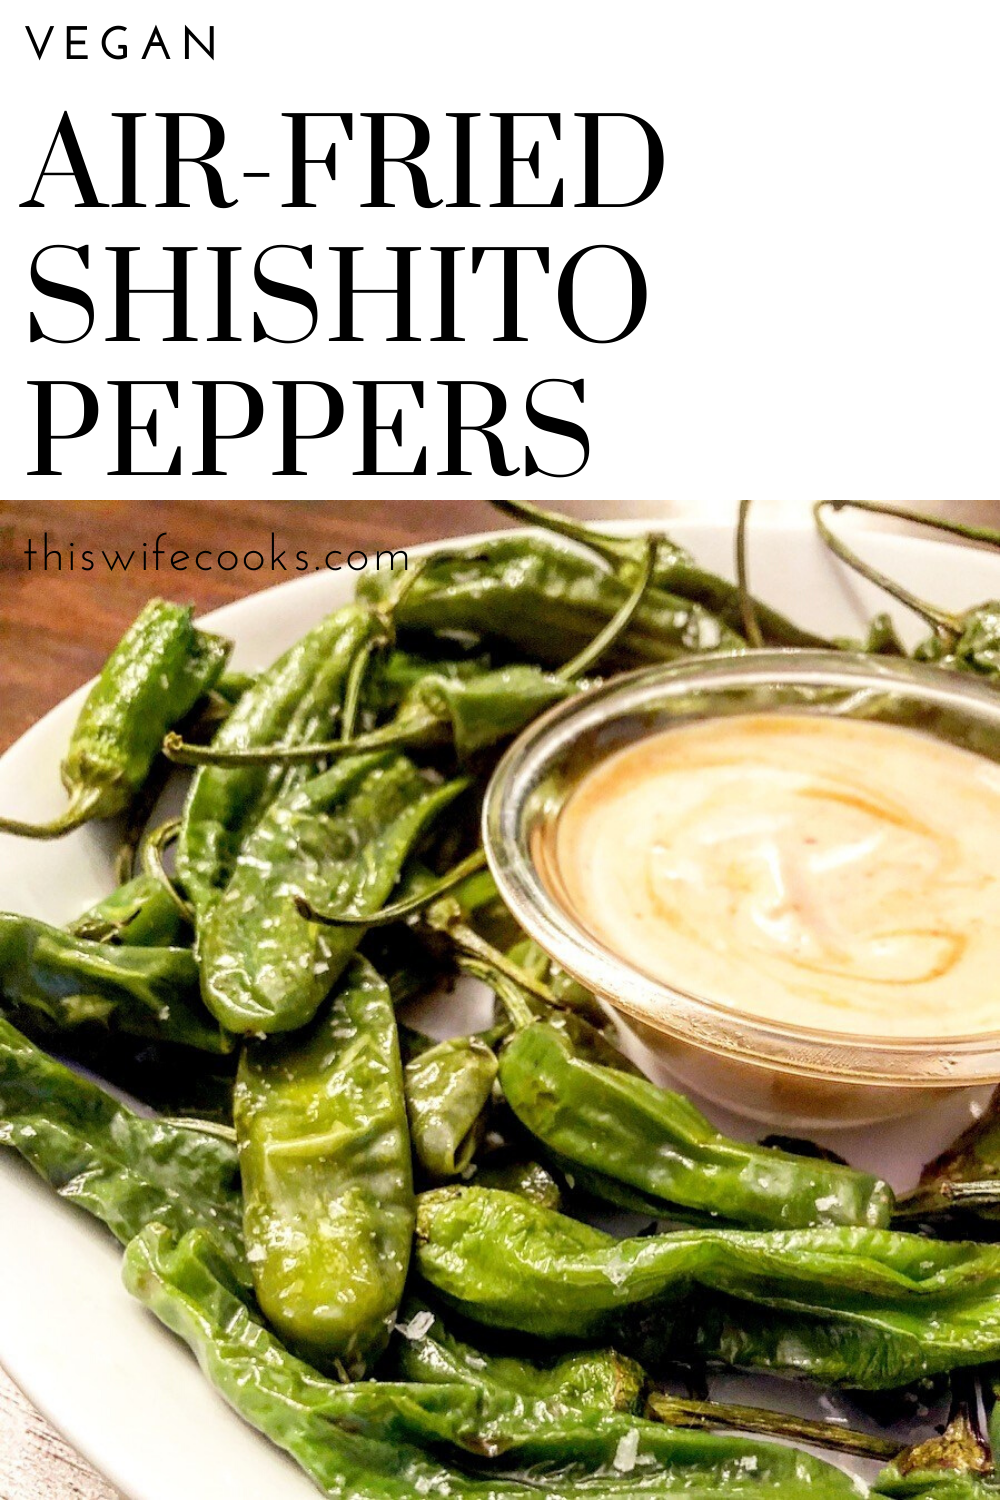 Air-fried Shishito Peppers recipe - A super easy crowd-pleasing and plant-based snack that is ready to serve in just 10 minutes!  via @thiswifecooks